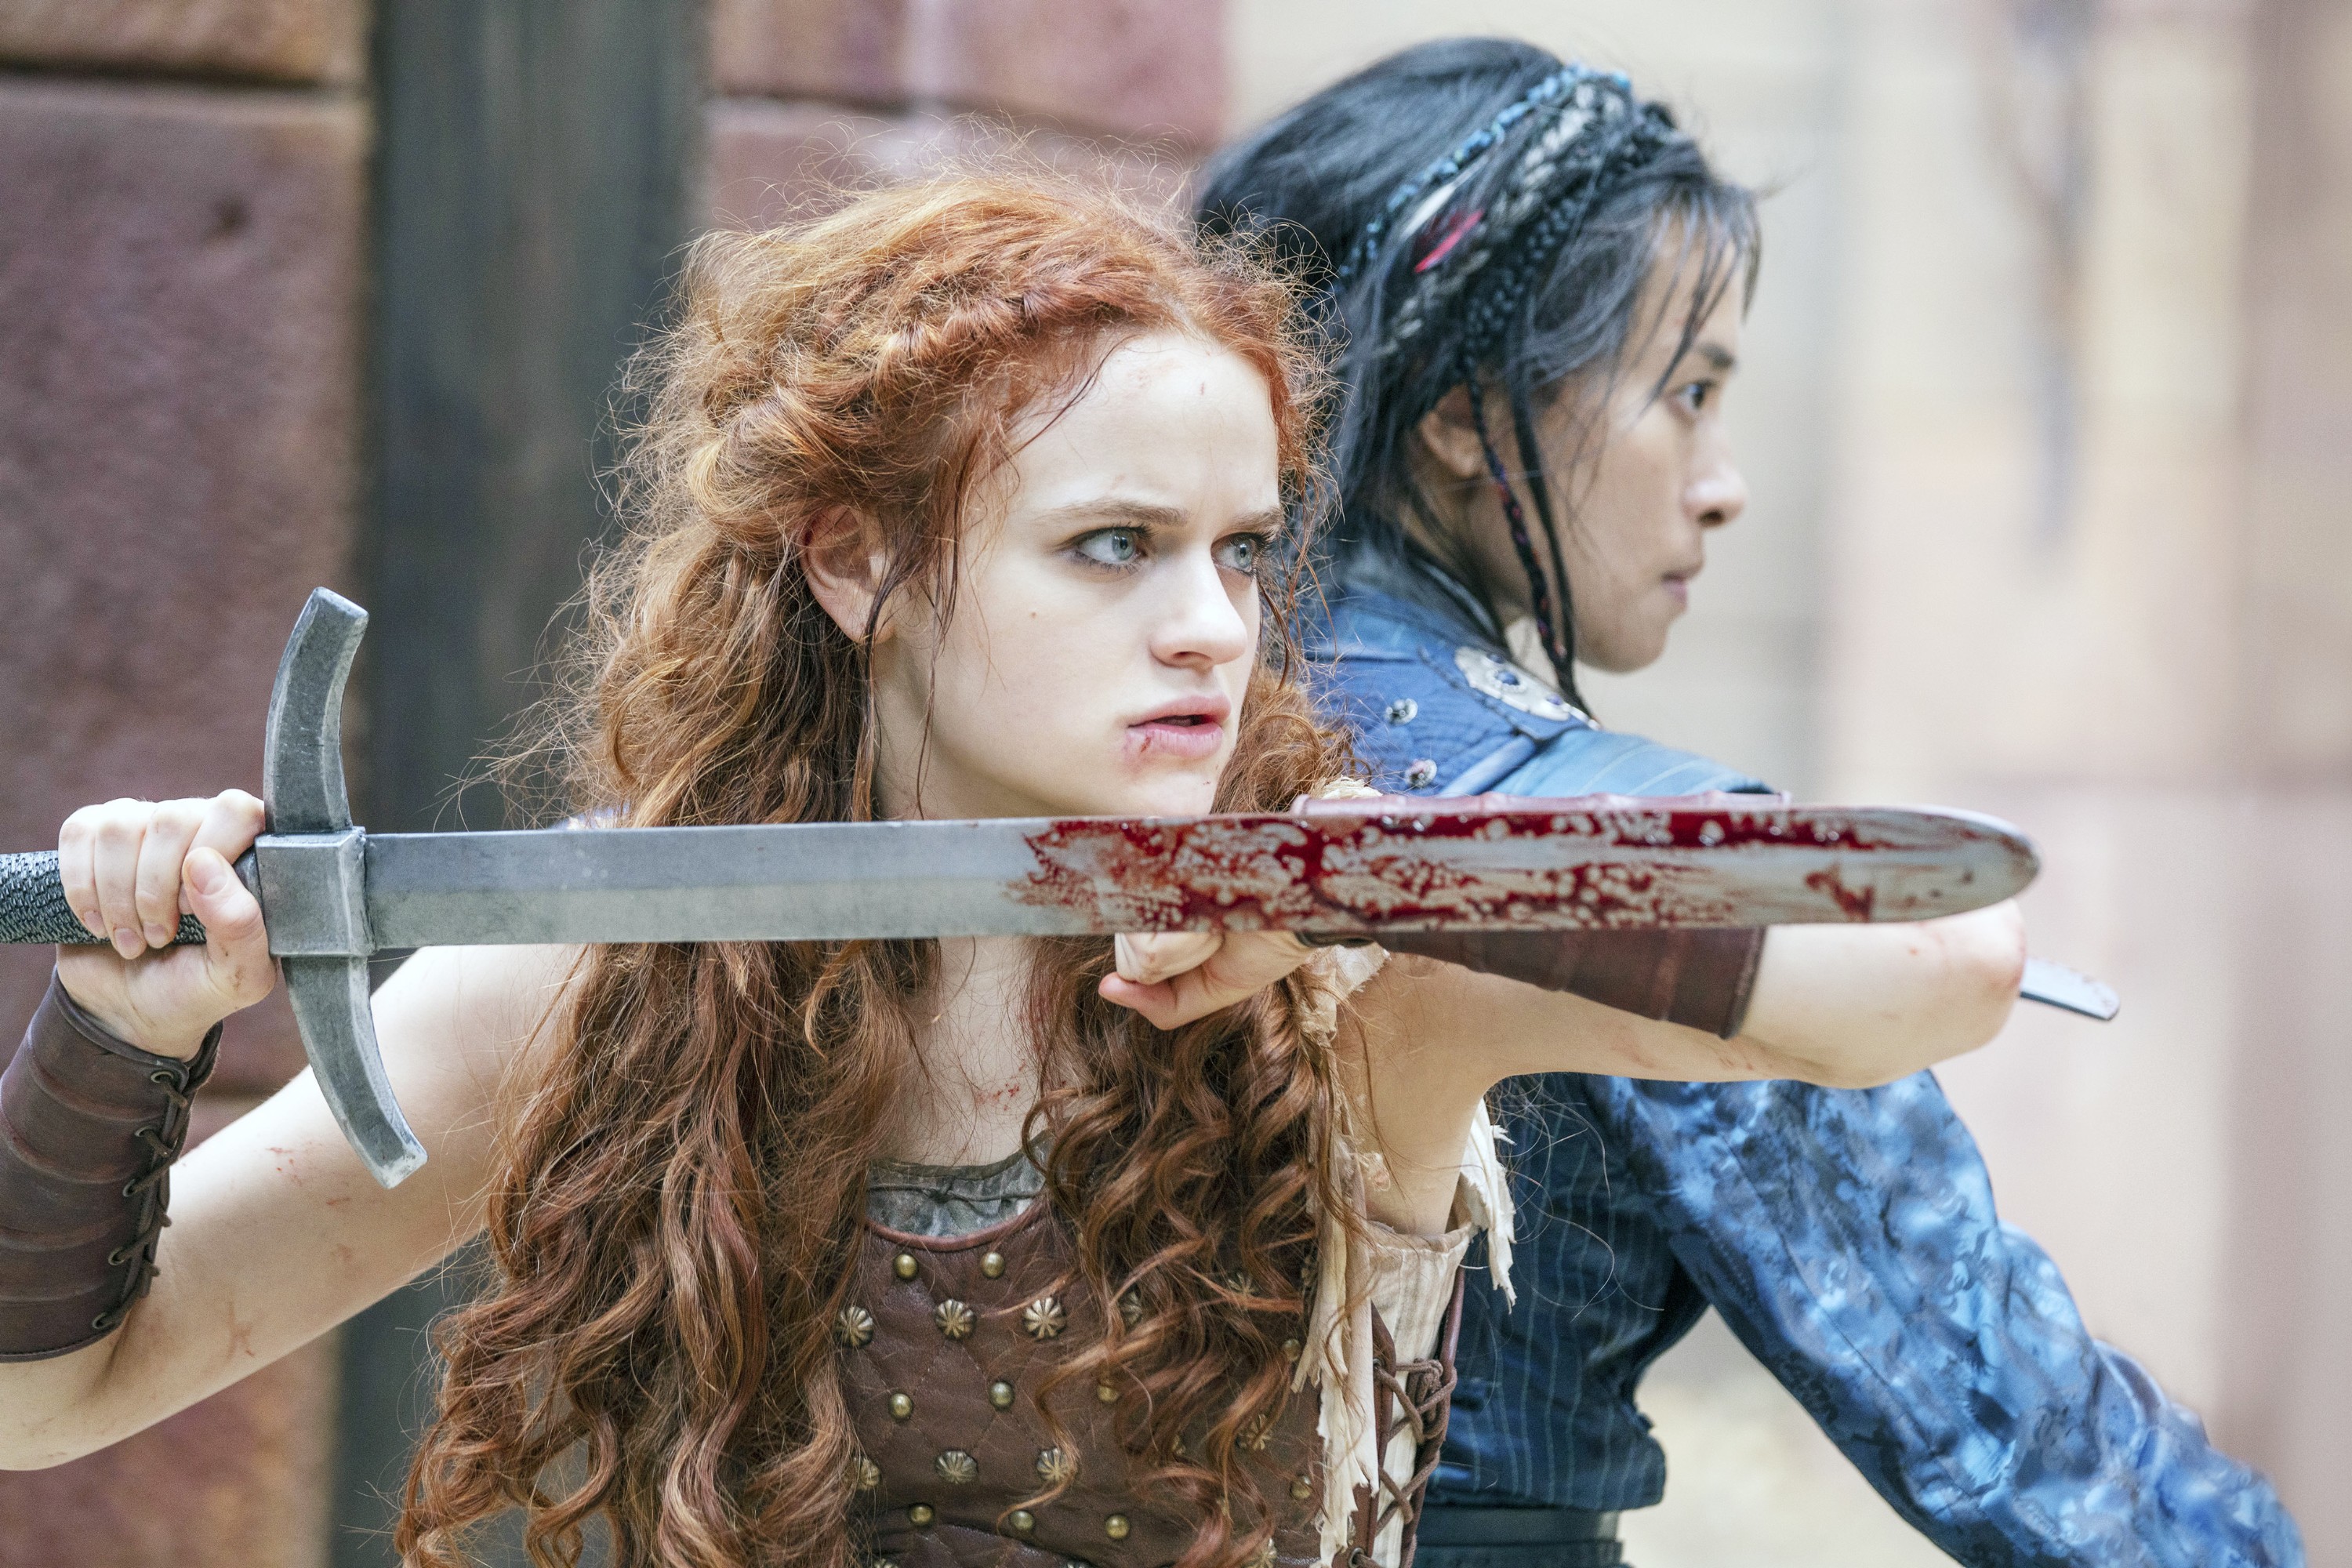 the princess joey king holds a bloody sword